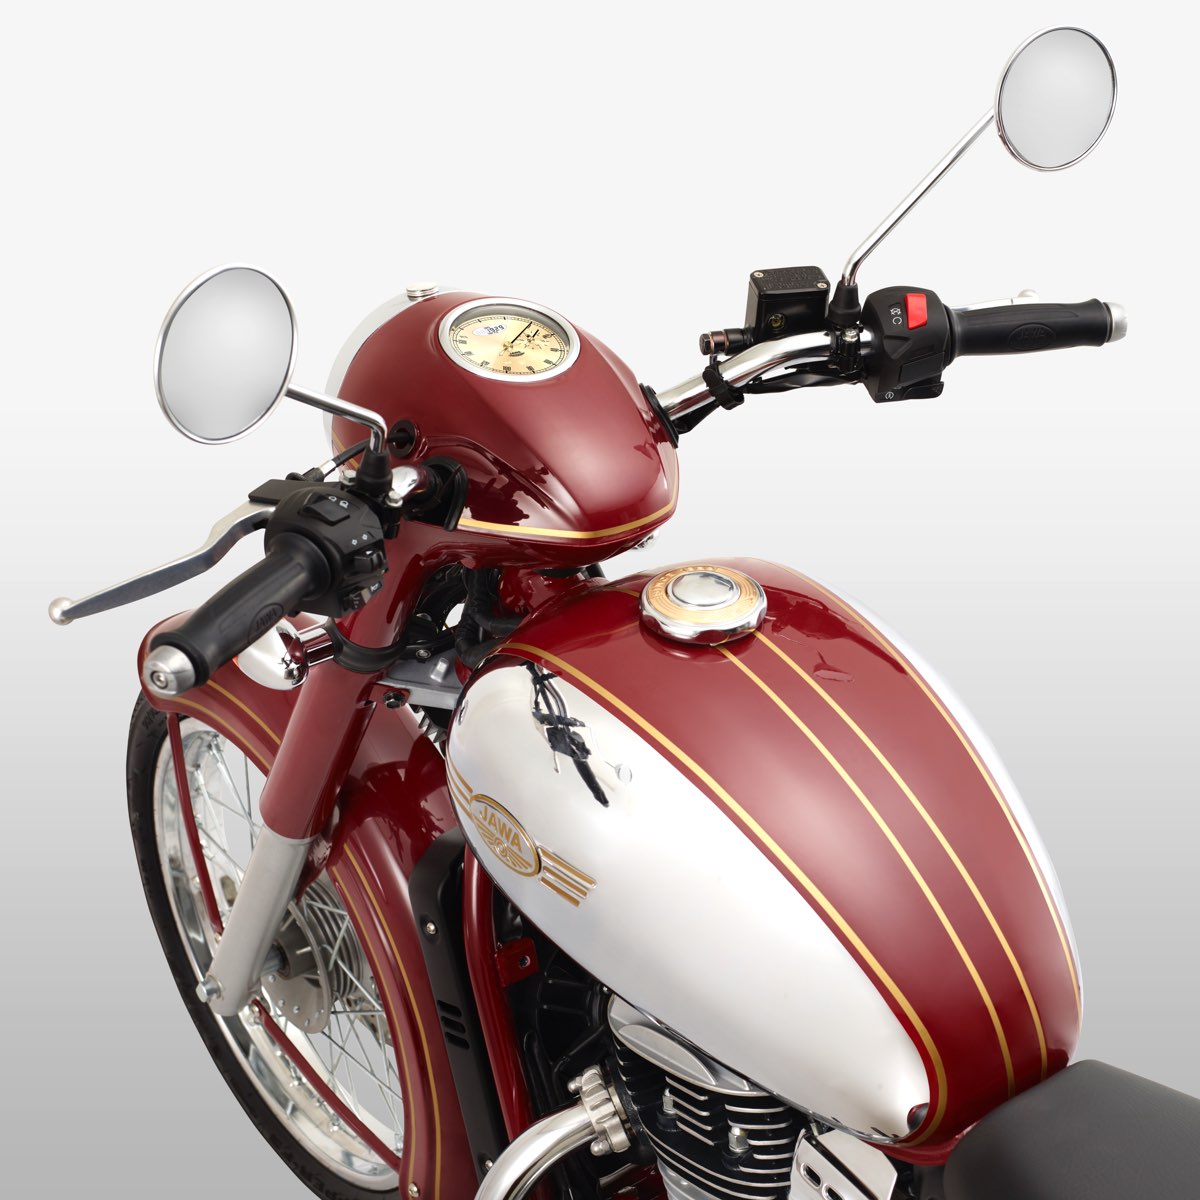 Jawa Motorcycles Reborn In India 2 New Models Launched